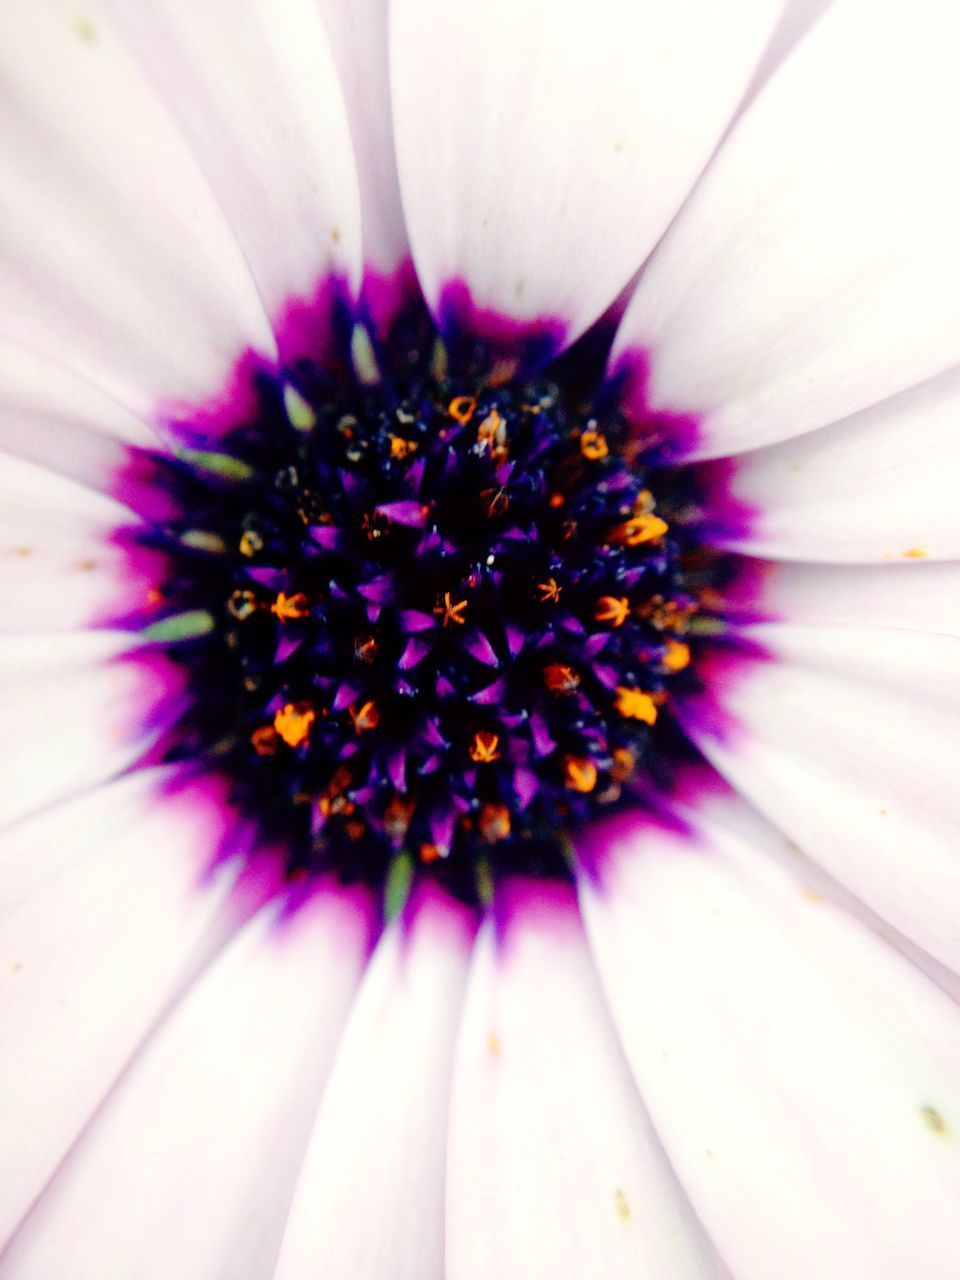 EXTREME CLOSE UP OF PURPLE FLOWER